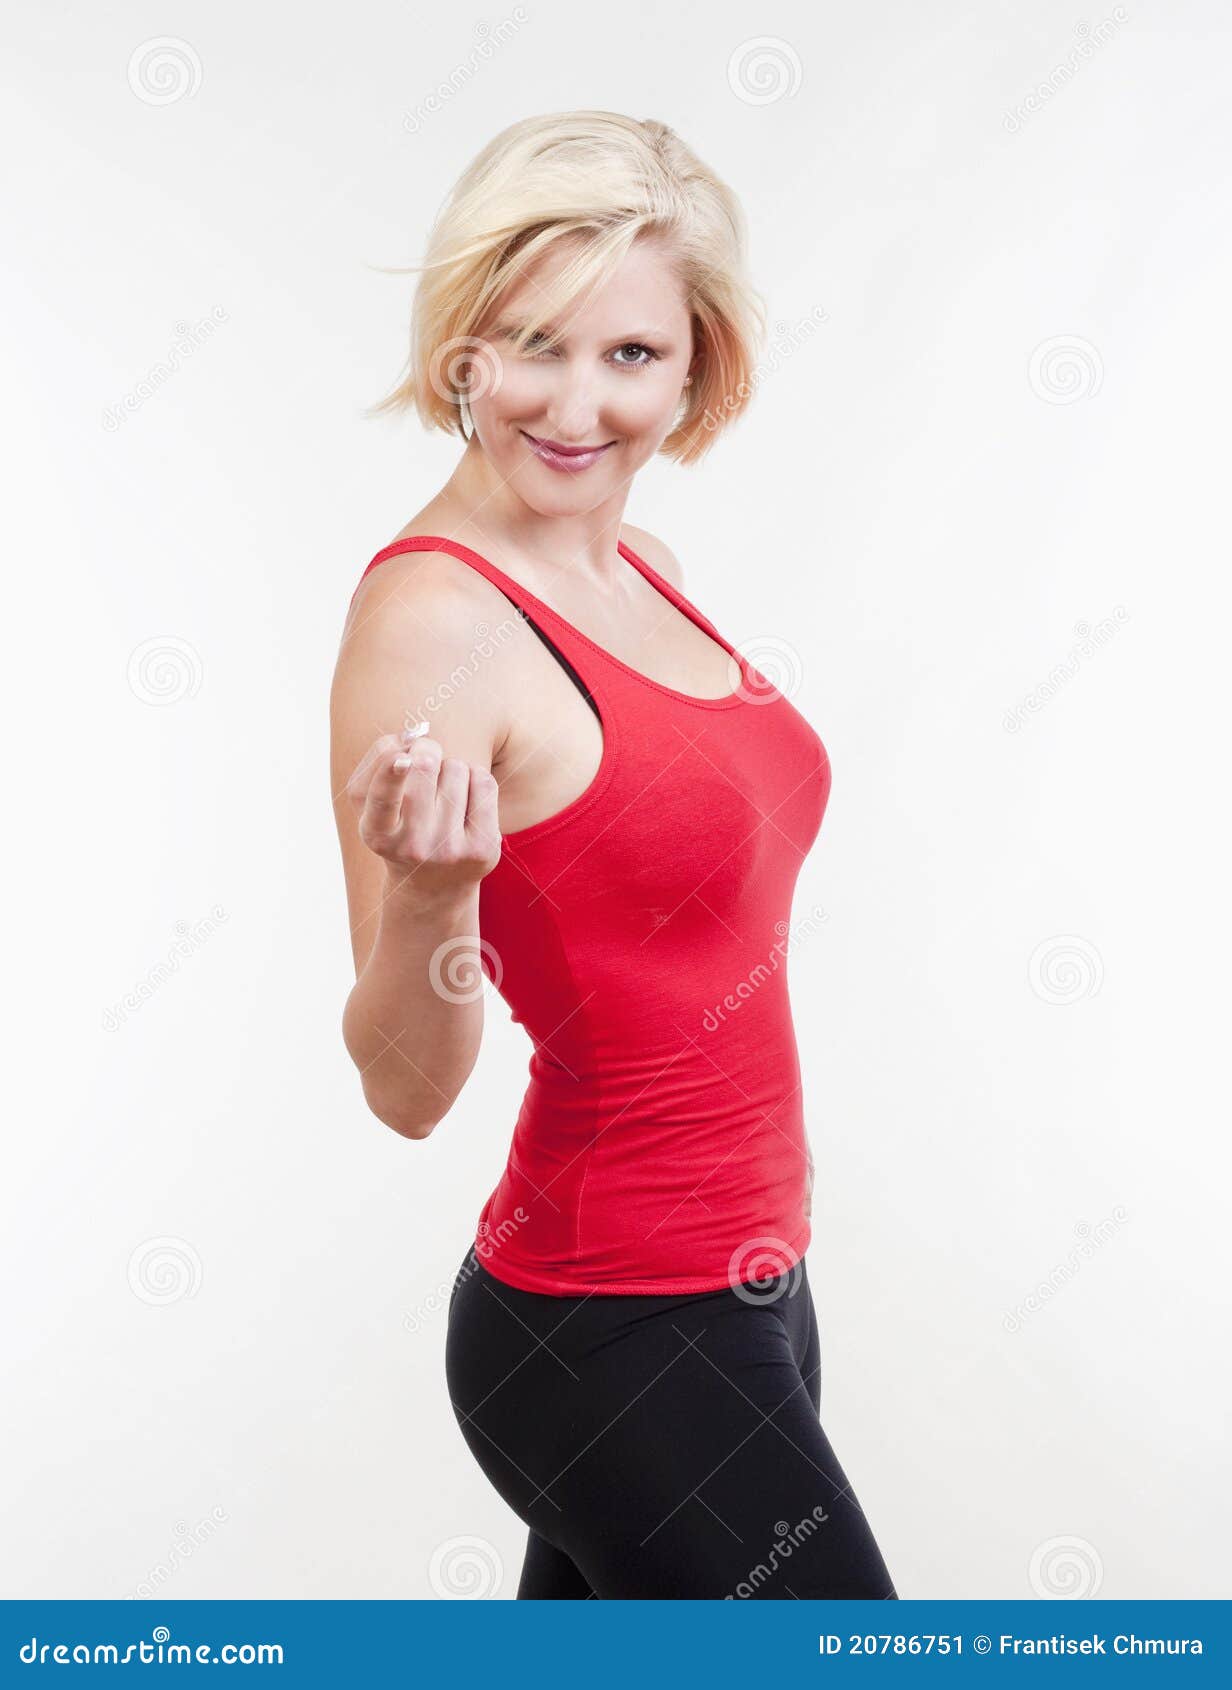 Girl Showing Come On Gesture Stock Image - Image 20786751-1142